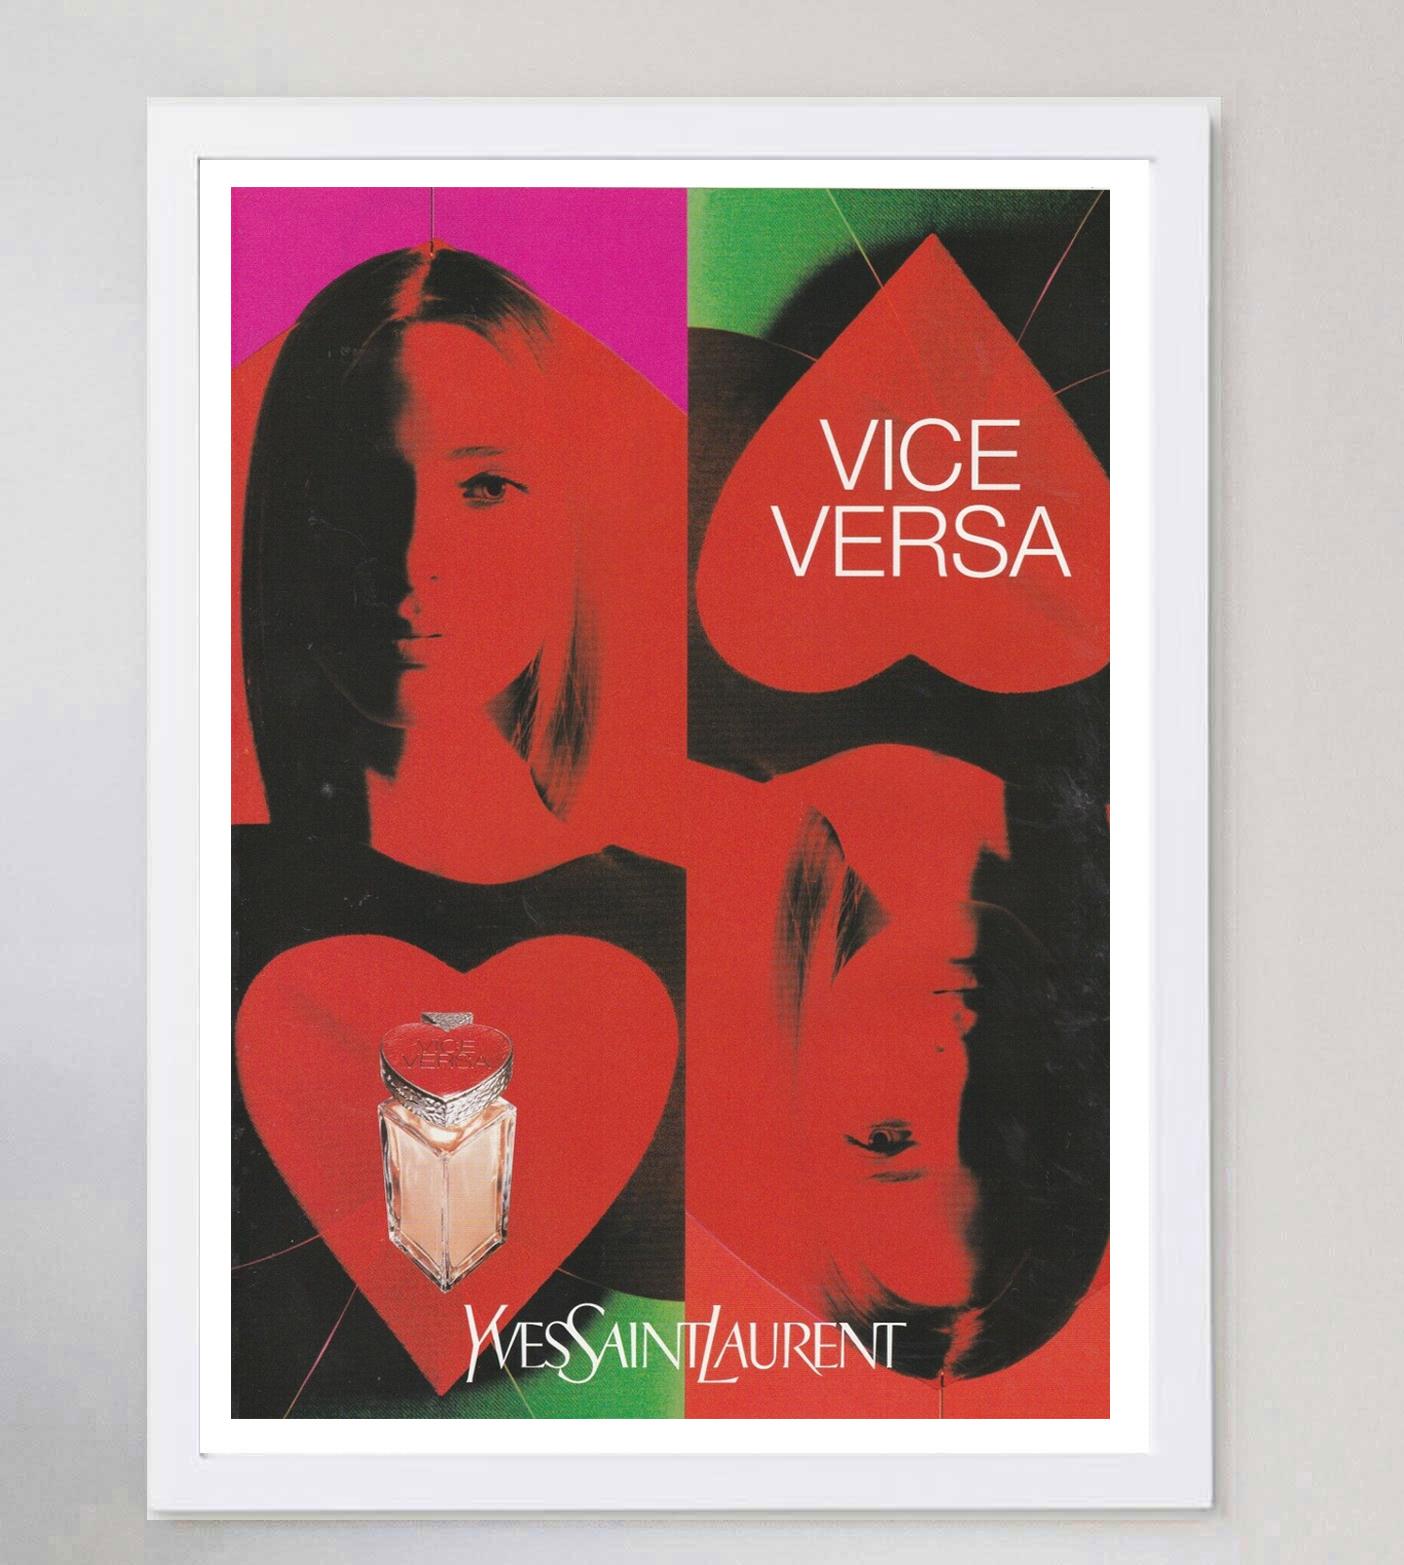 1999 Yves Saint Laurent - Vice Versa Original Vintage Poster In Good Condition For Sale In Winchester, GB